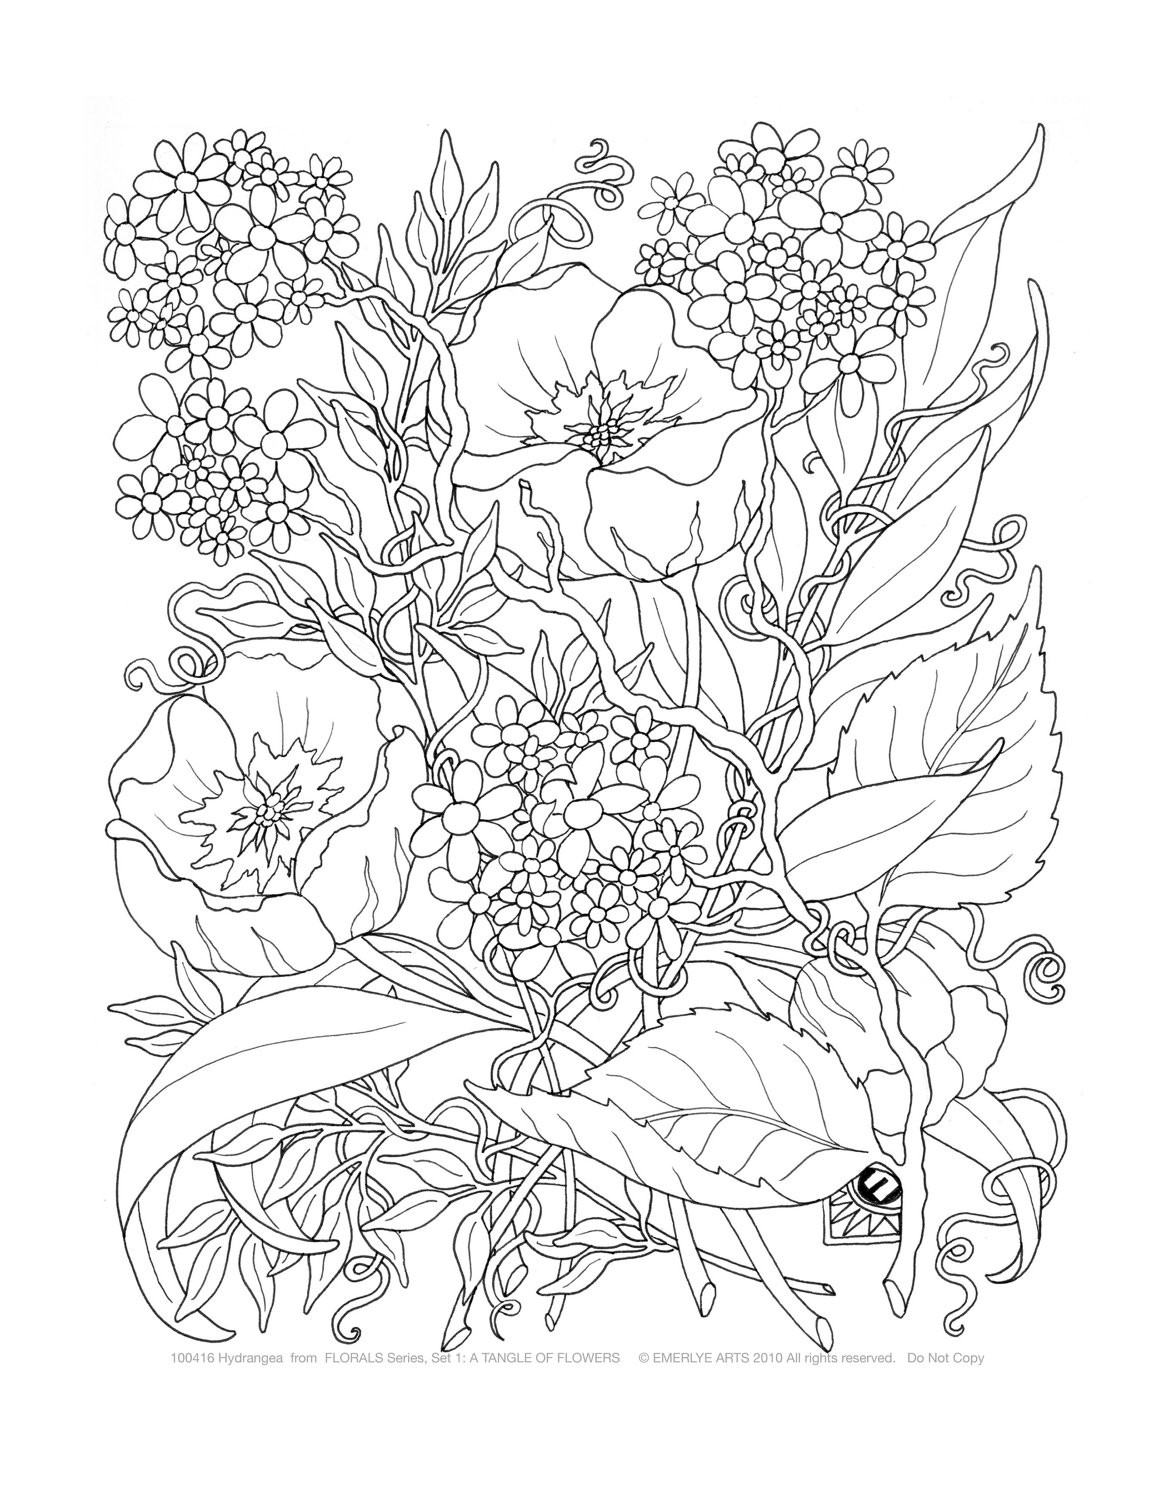 Coloring Pages For Adults Flowers
 Adult Coloring A Tangle of Flowers Set of 8 by emerlyearts